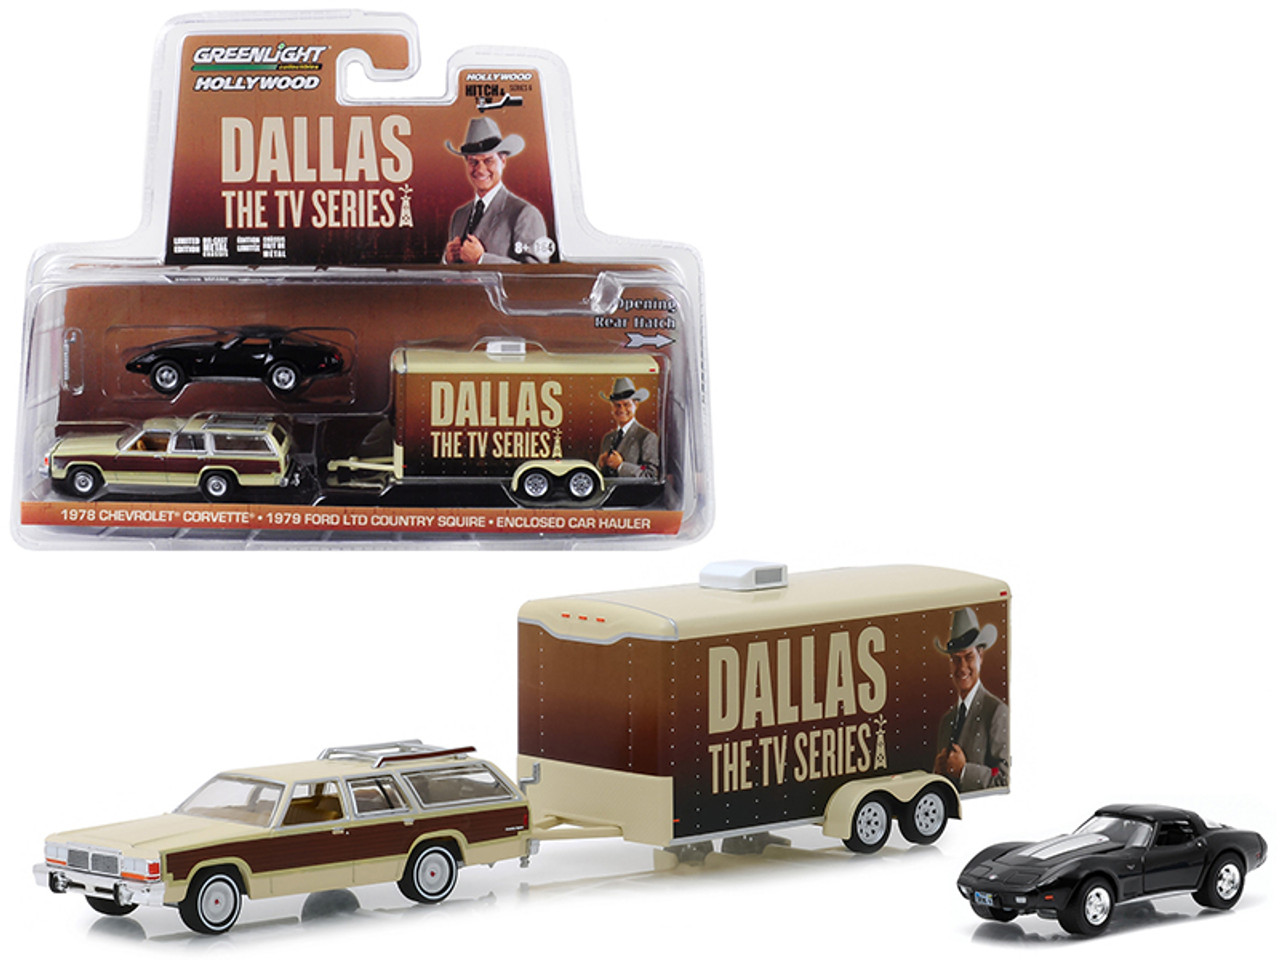 1979 Ford LTD Country Squire Wagon with 1978 Chevrolet Corvette and Enclosed Car Hauler "Dallas" (1978-1991) TV Series "Hollywood Hitch and Tow" Series 6 1/64 Diecast Models by Greenlight